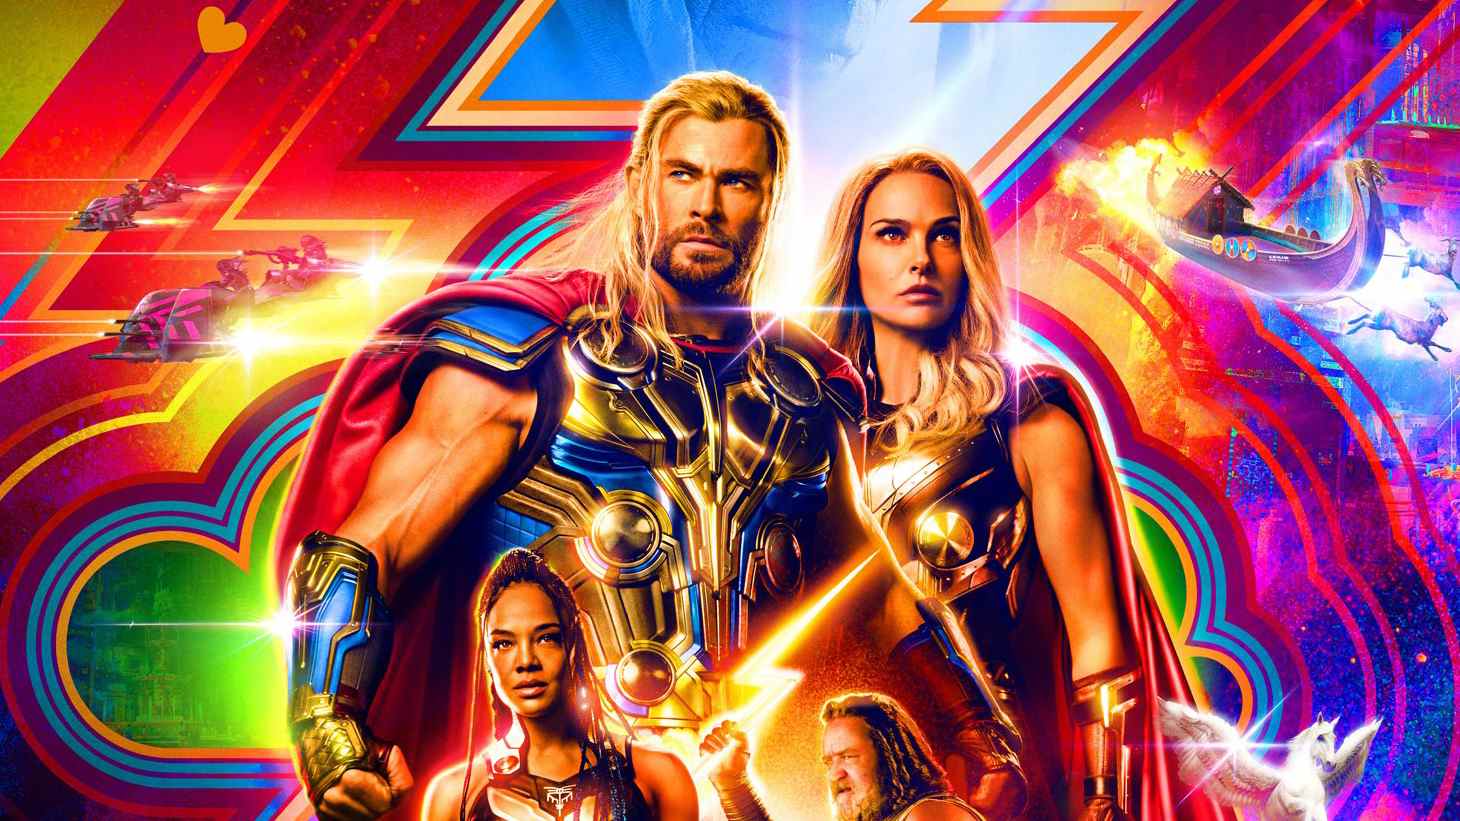 Chris Hemsworth comme Thor, Natalie Portman comme Jane Foster/The Mighty Thor, Tessa Thompson comme King Valkyrie et Russell Crowe comme Zeus dans Thor : Love and Thunder poster art